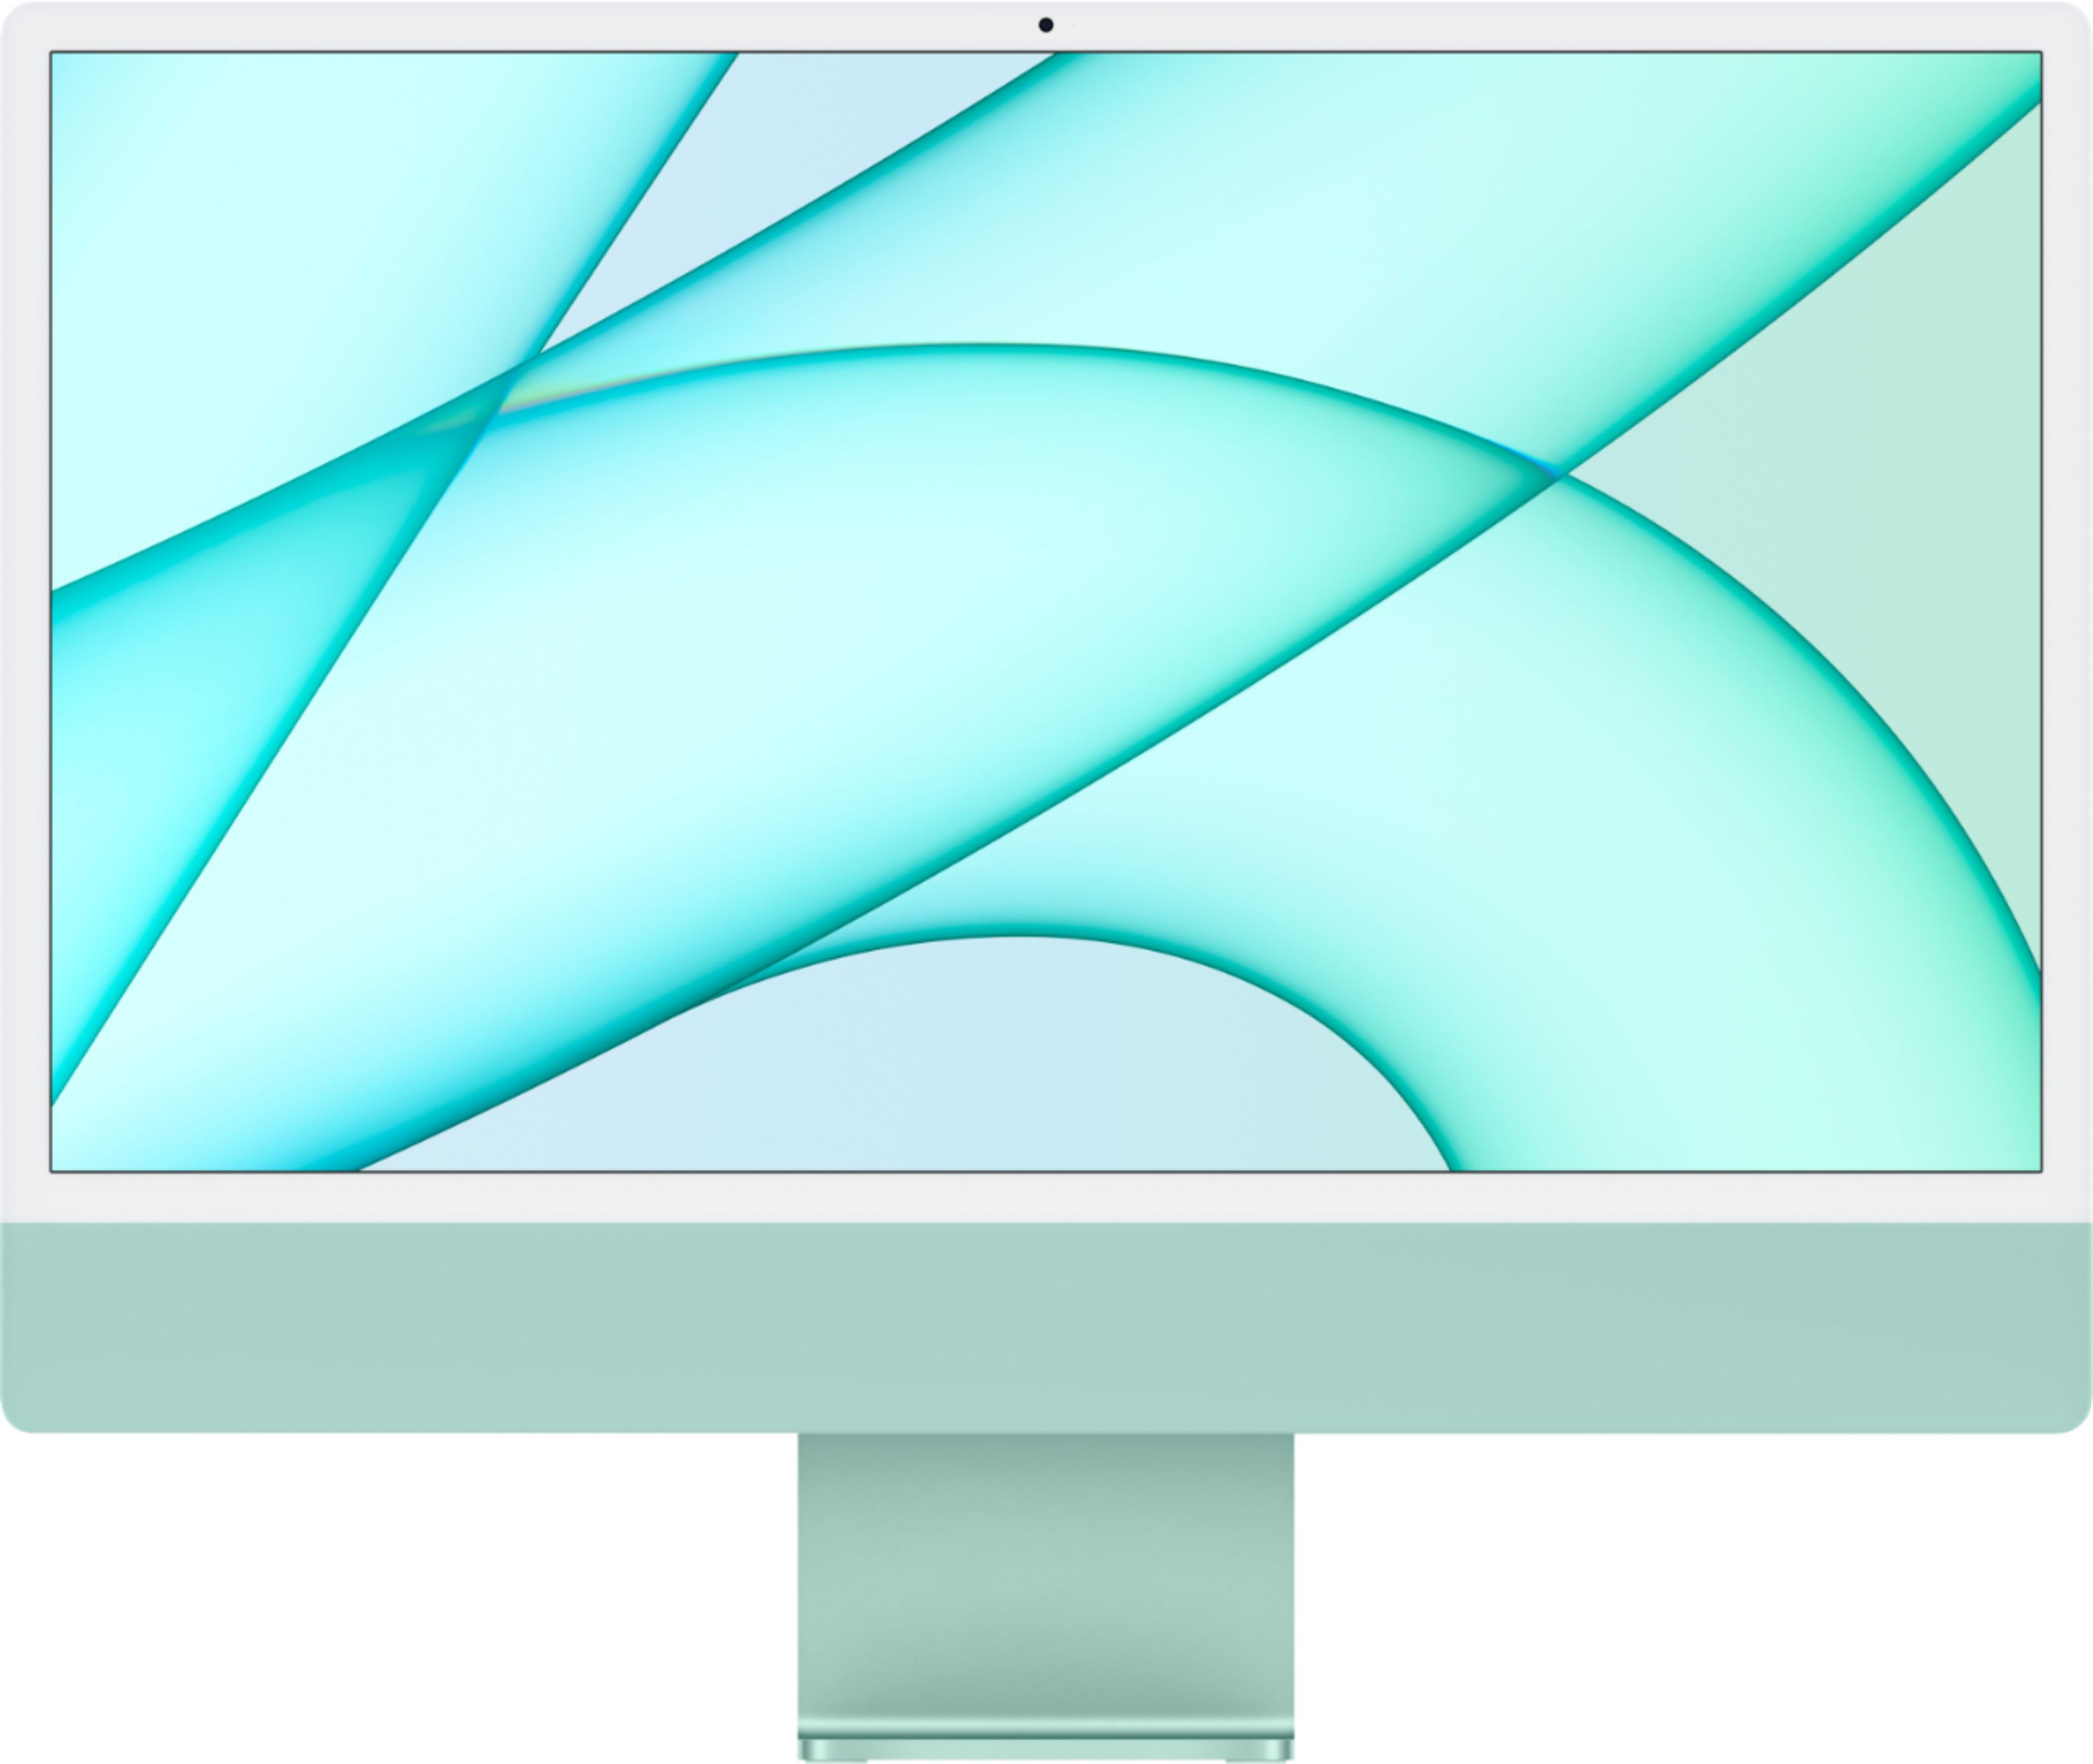 Apple iMac 24-Inch Review: The Right Mac For Most People